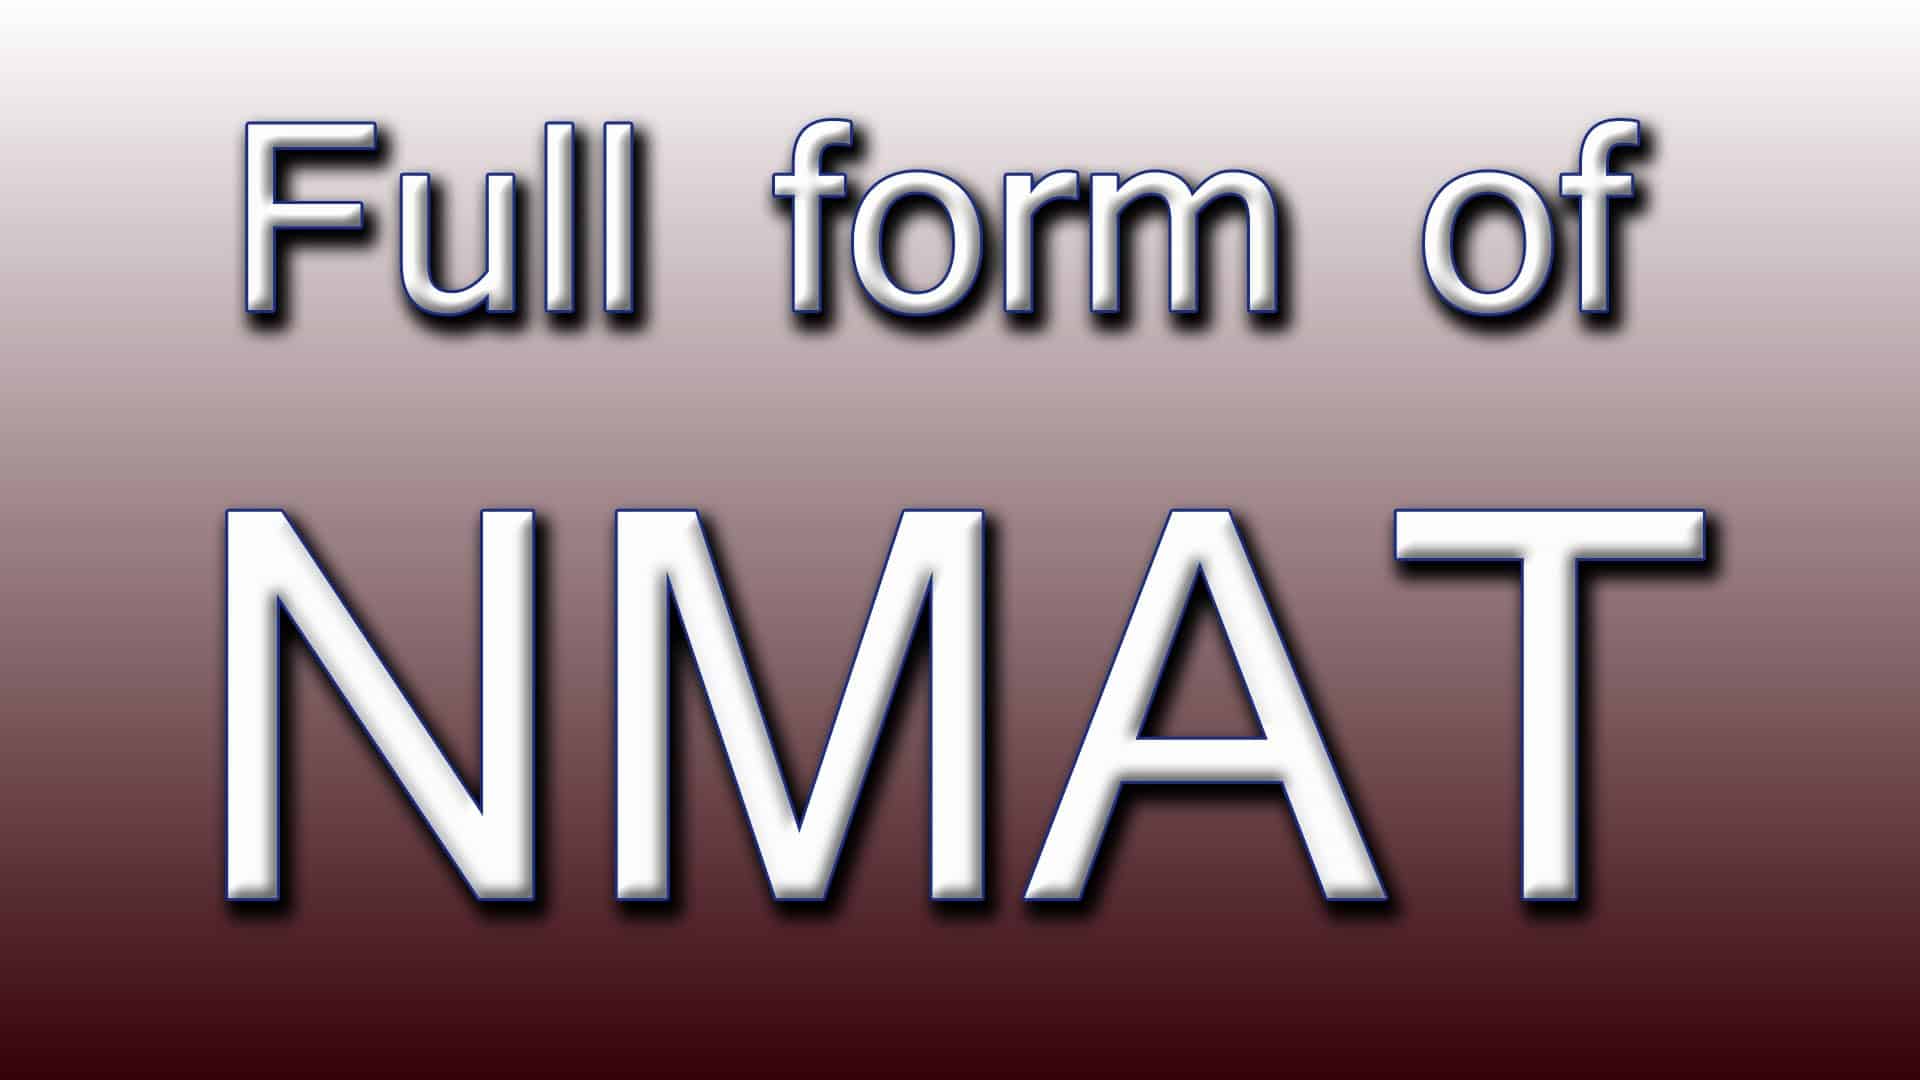 nmat-full-form-what-is-the-full-form-of-nmat-check-here